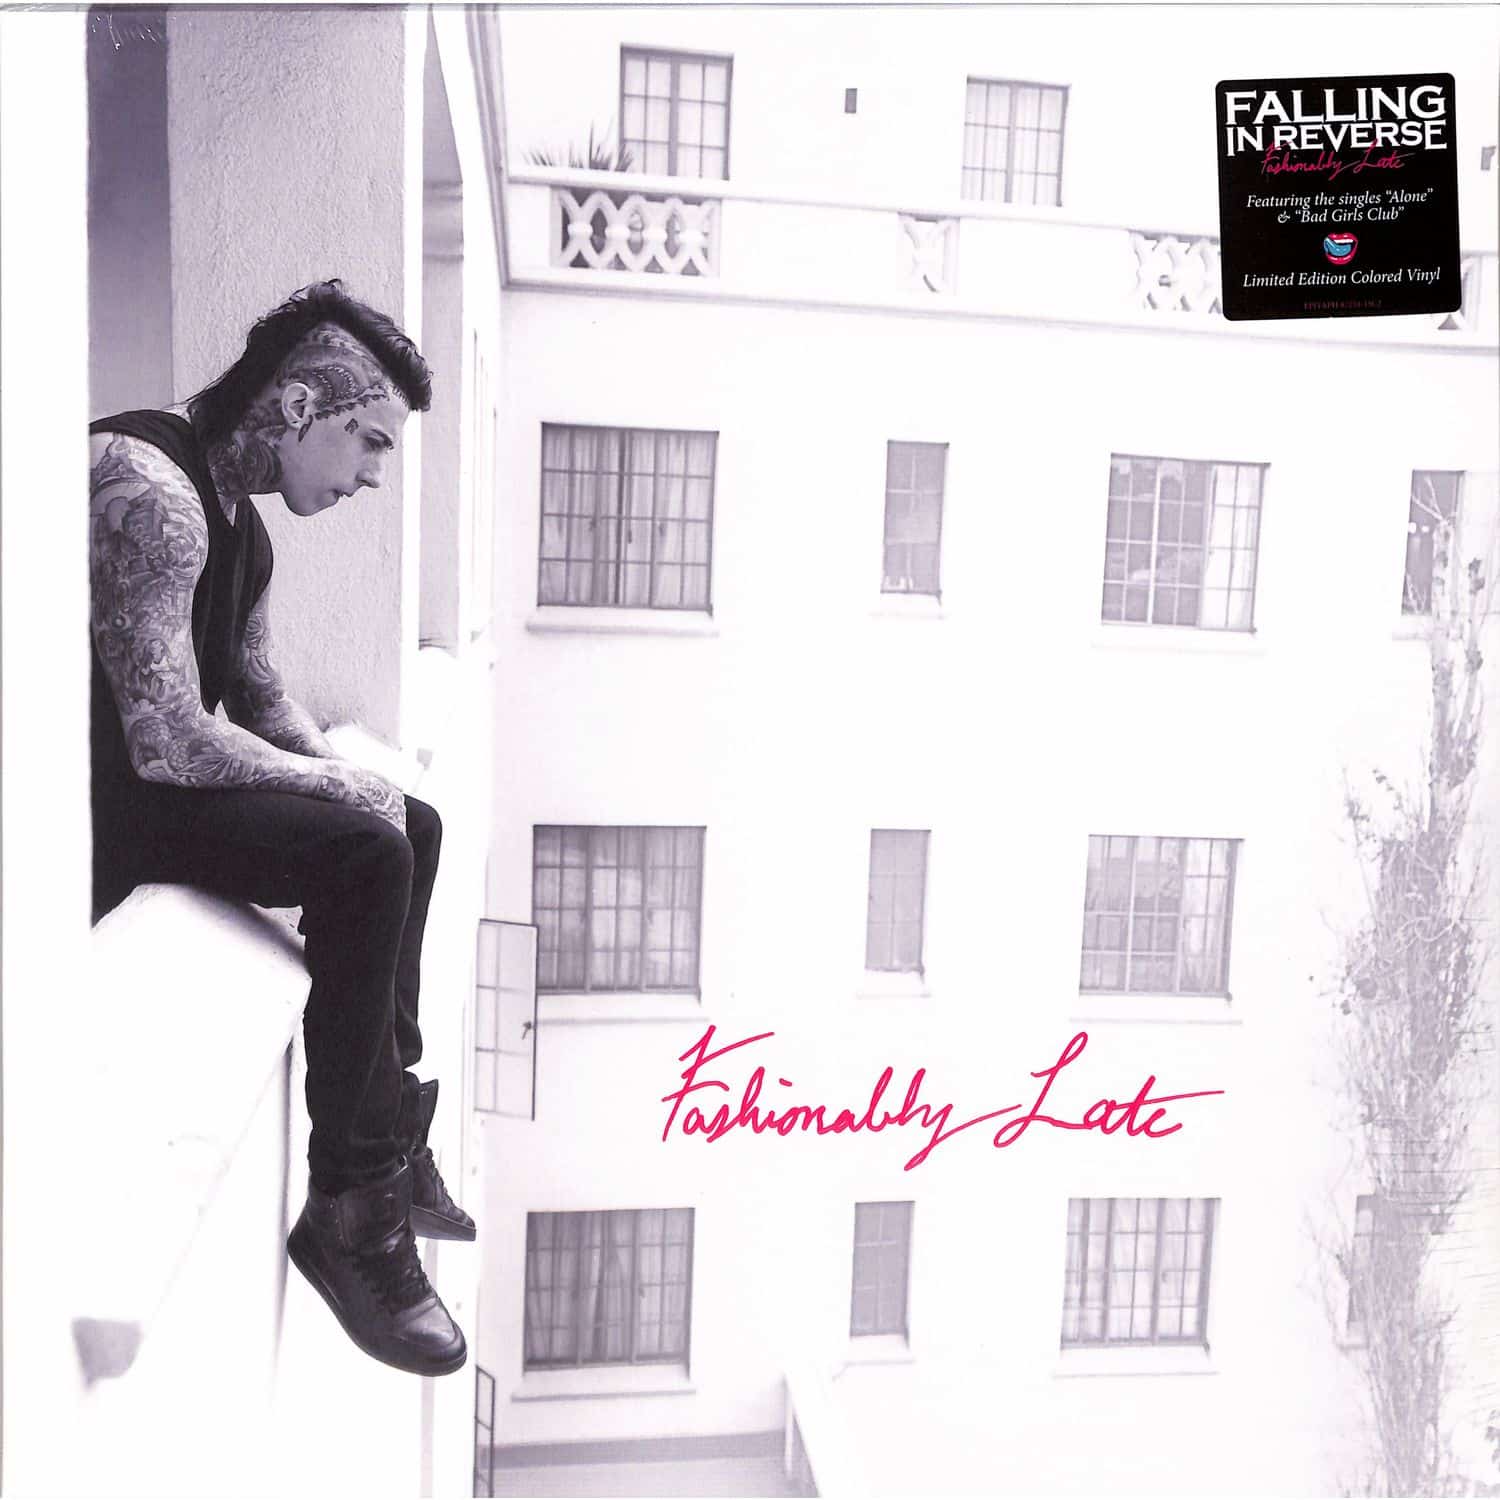 Falling in Reverse - FASHIONABLY LATE 